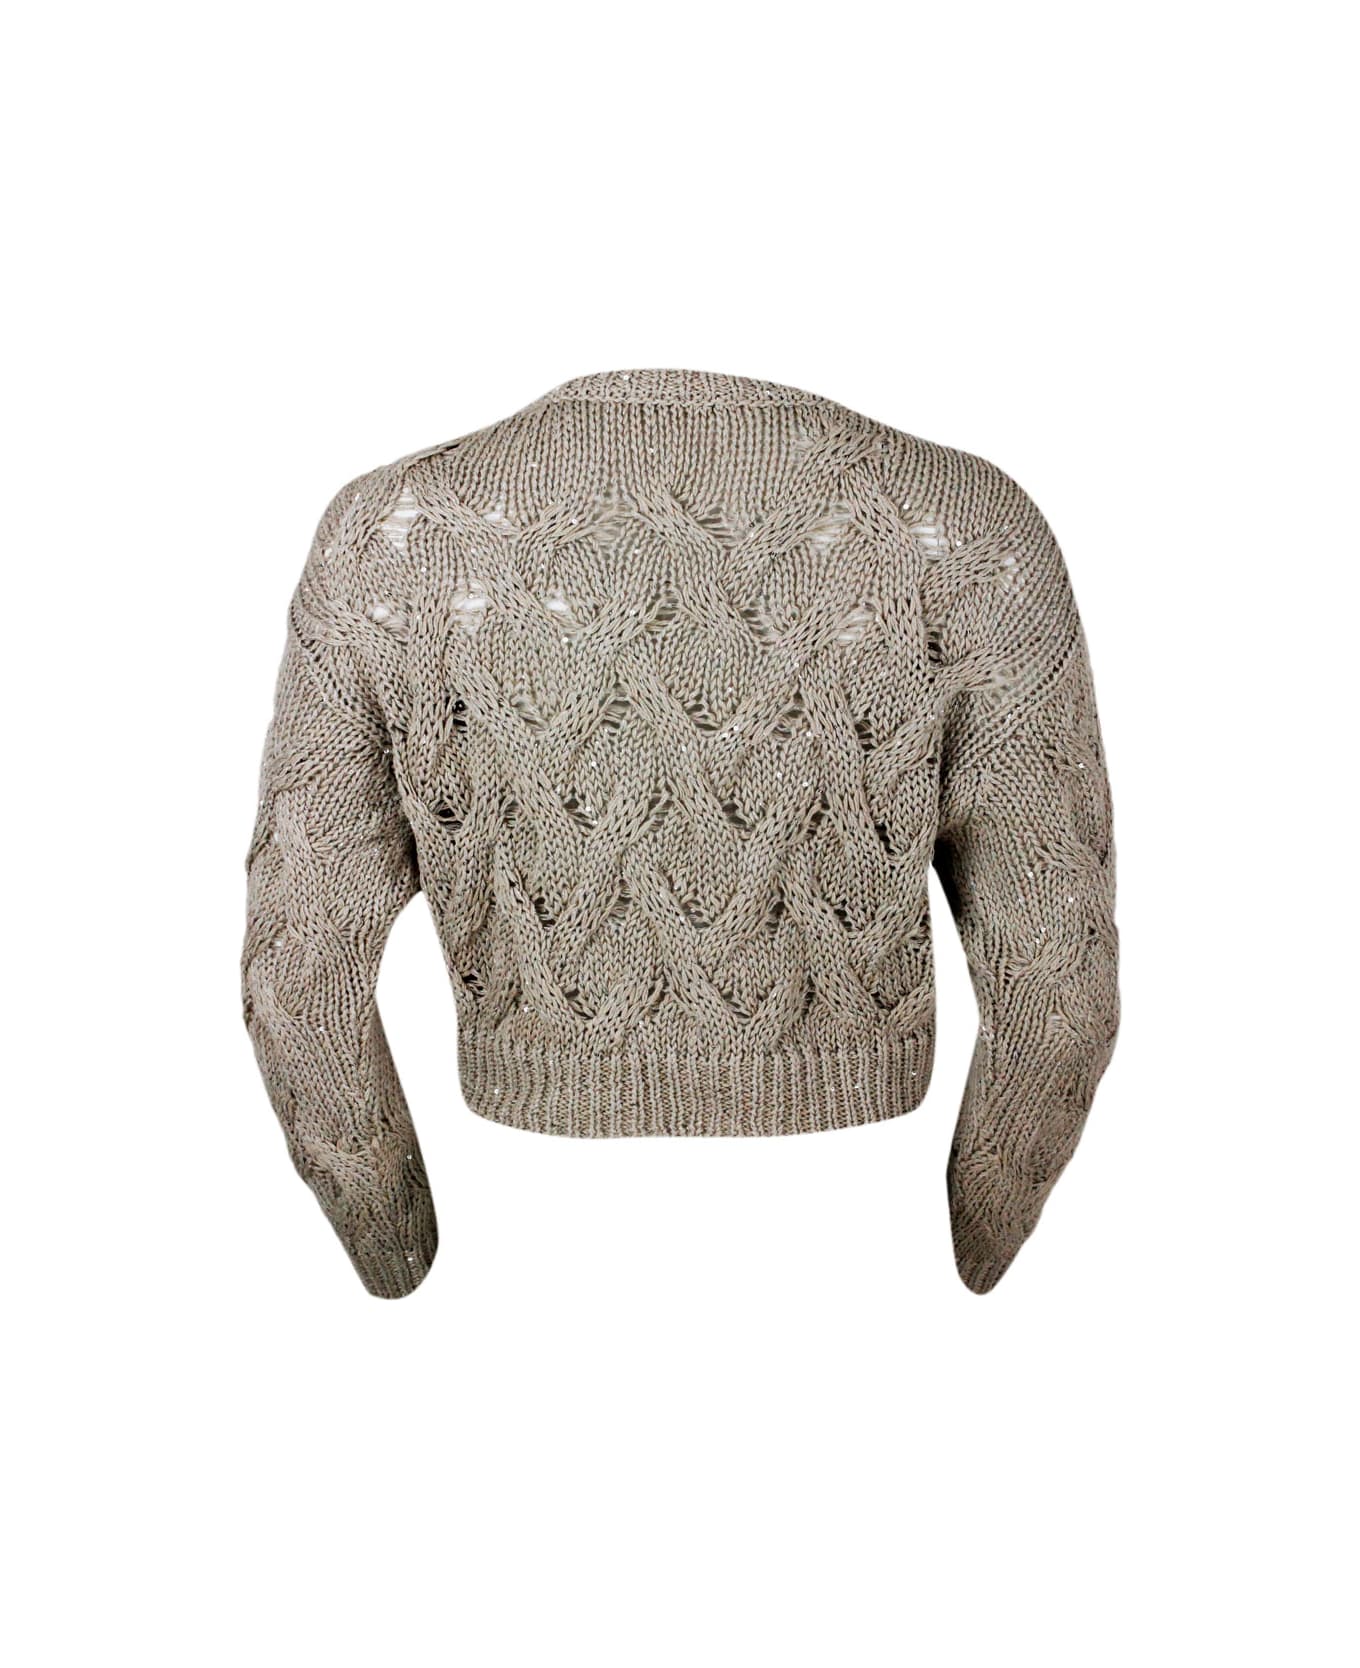 Antonelli Long-sleeved Crew-neck Sweater With Braided Workmanship Embellished With Microsequins - Beige